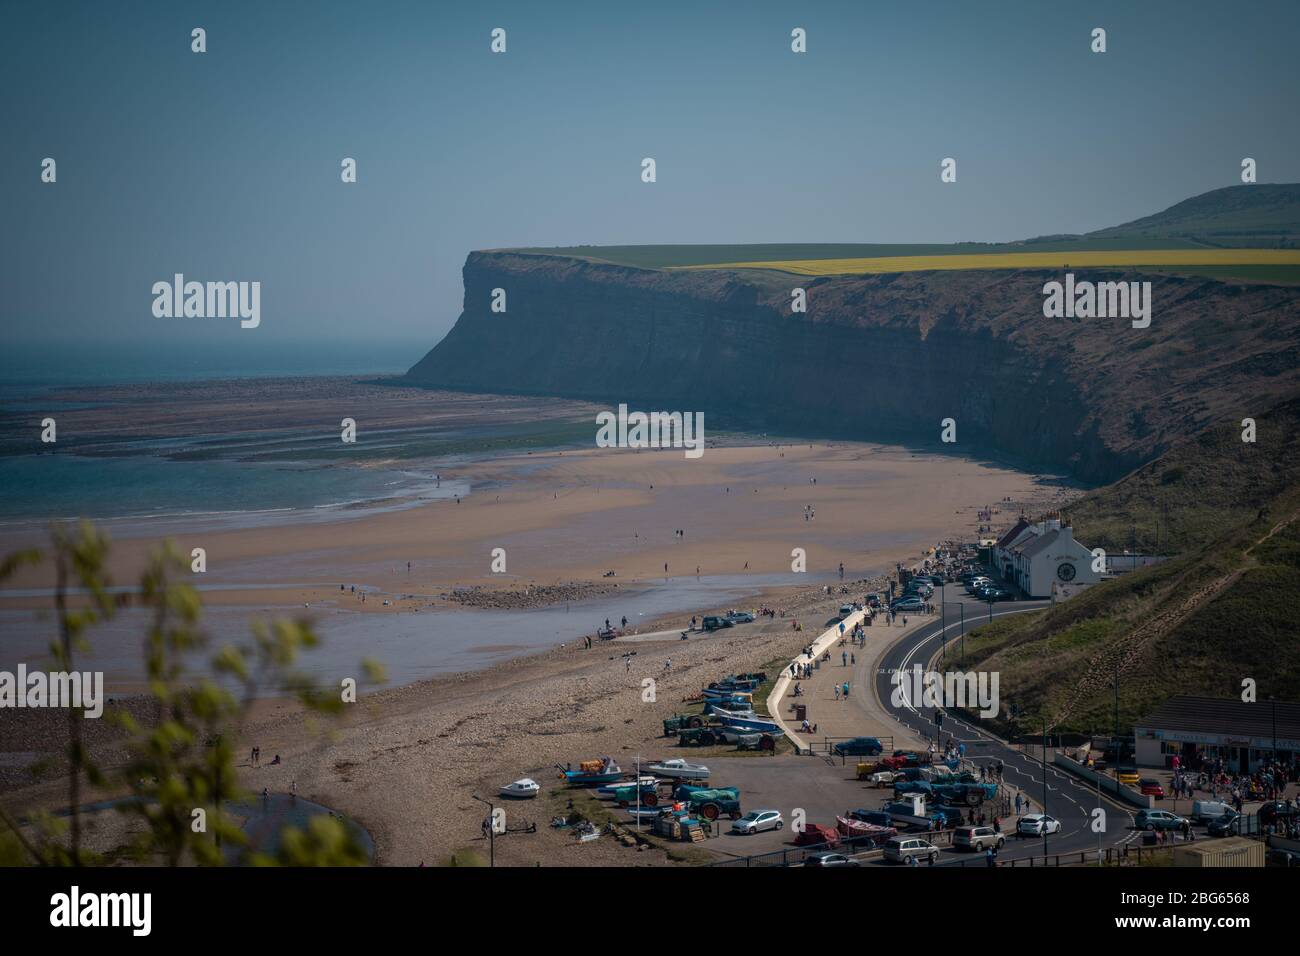 A view overlooking the beautiful beach of Saltburn-by-the-sea in Cleveland England Stock Photo